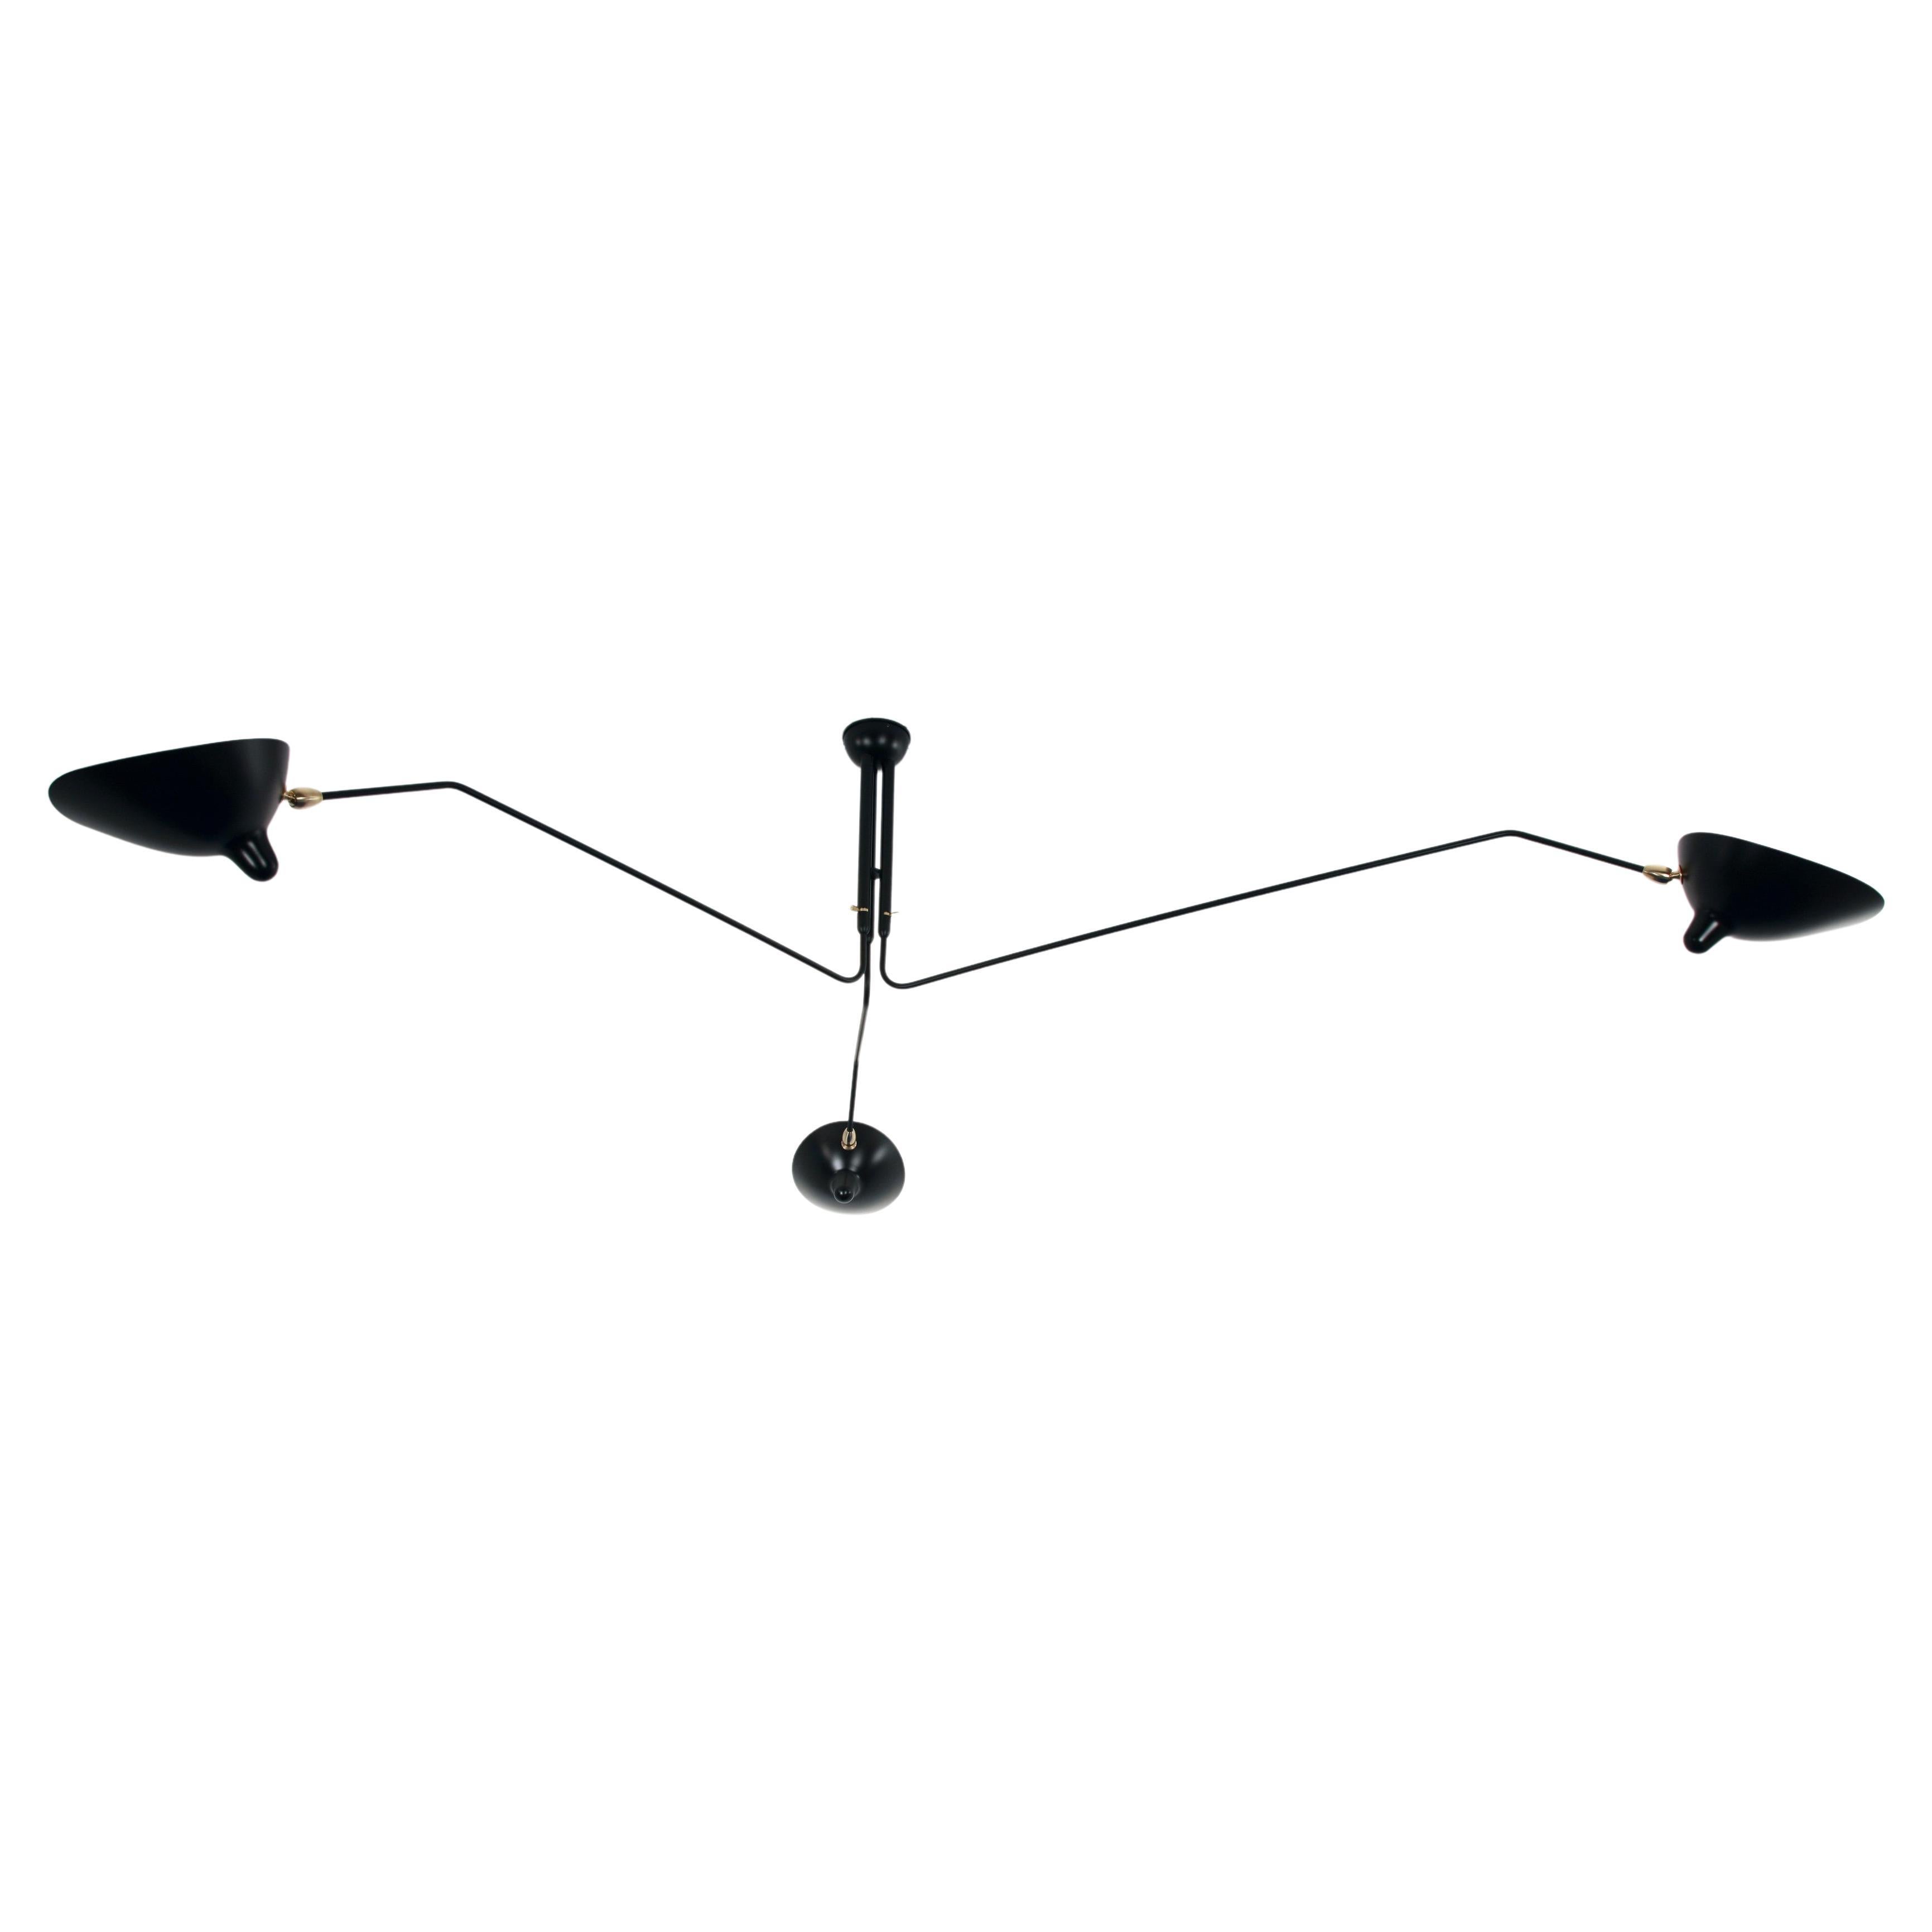 Serge Mouille Mid-Century Modern White Three Rotating Arms Ceiling 